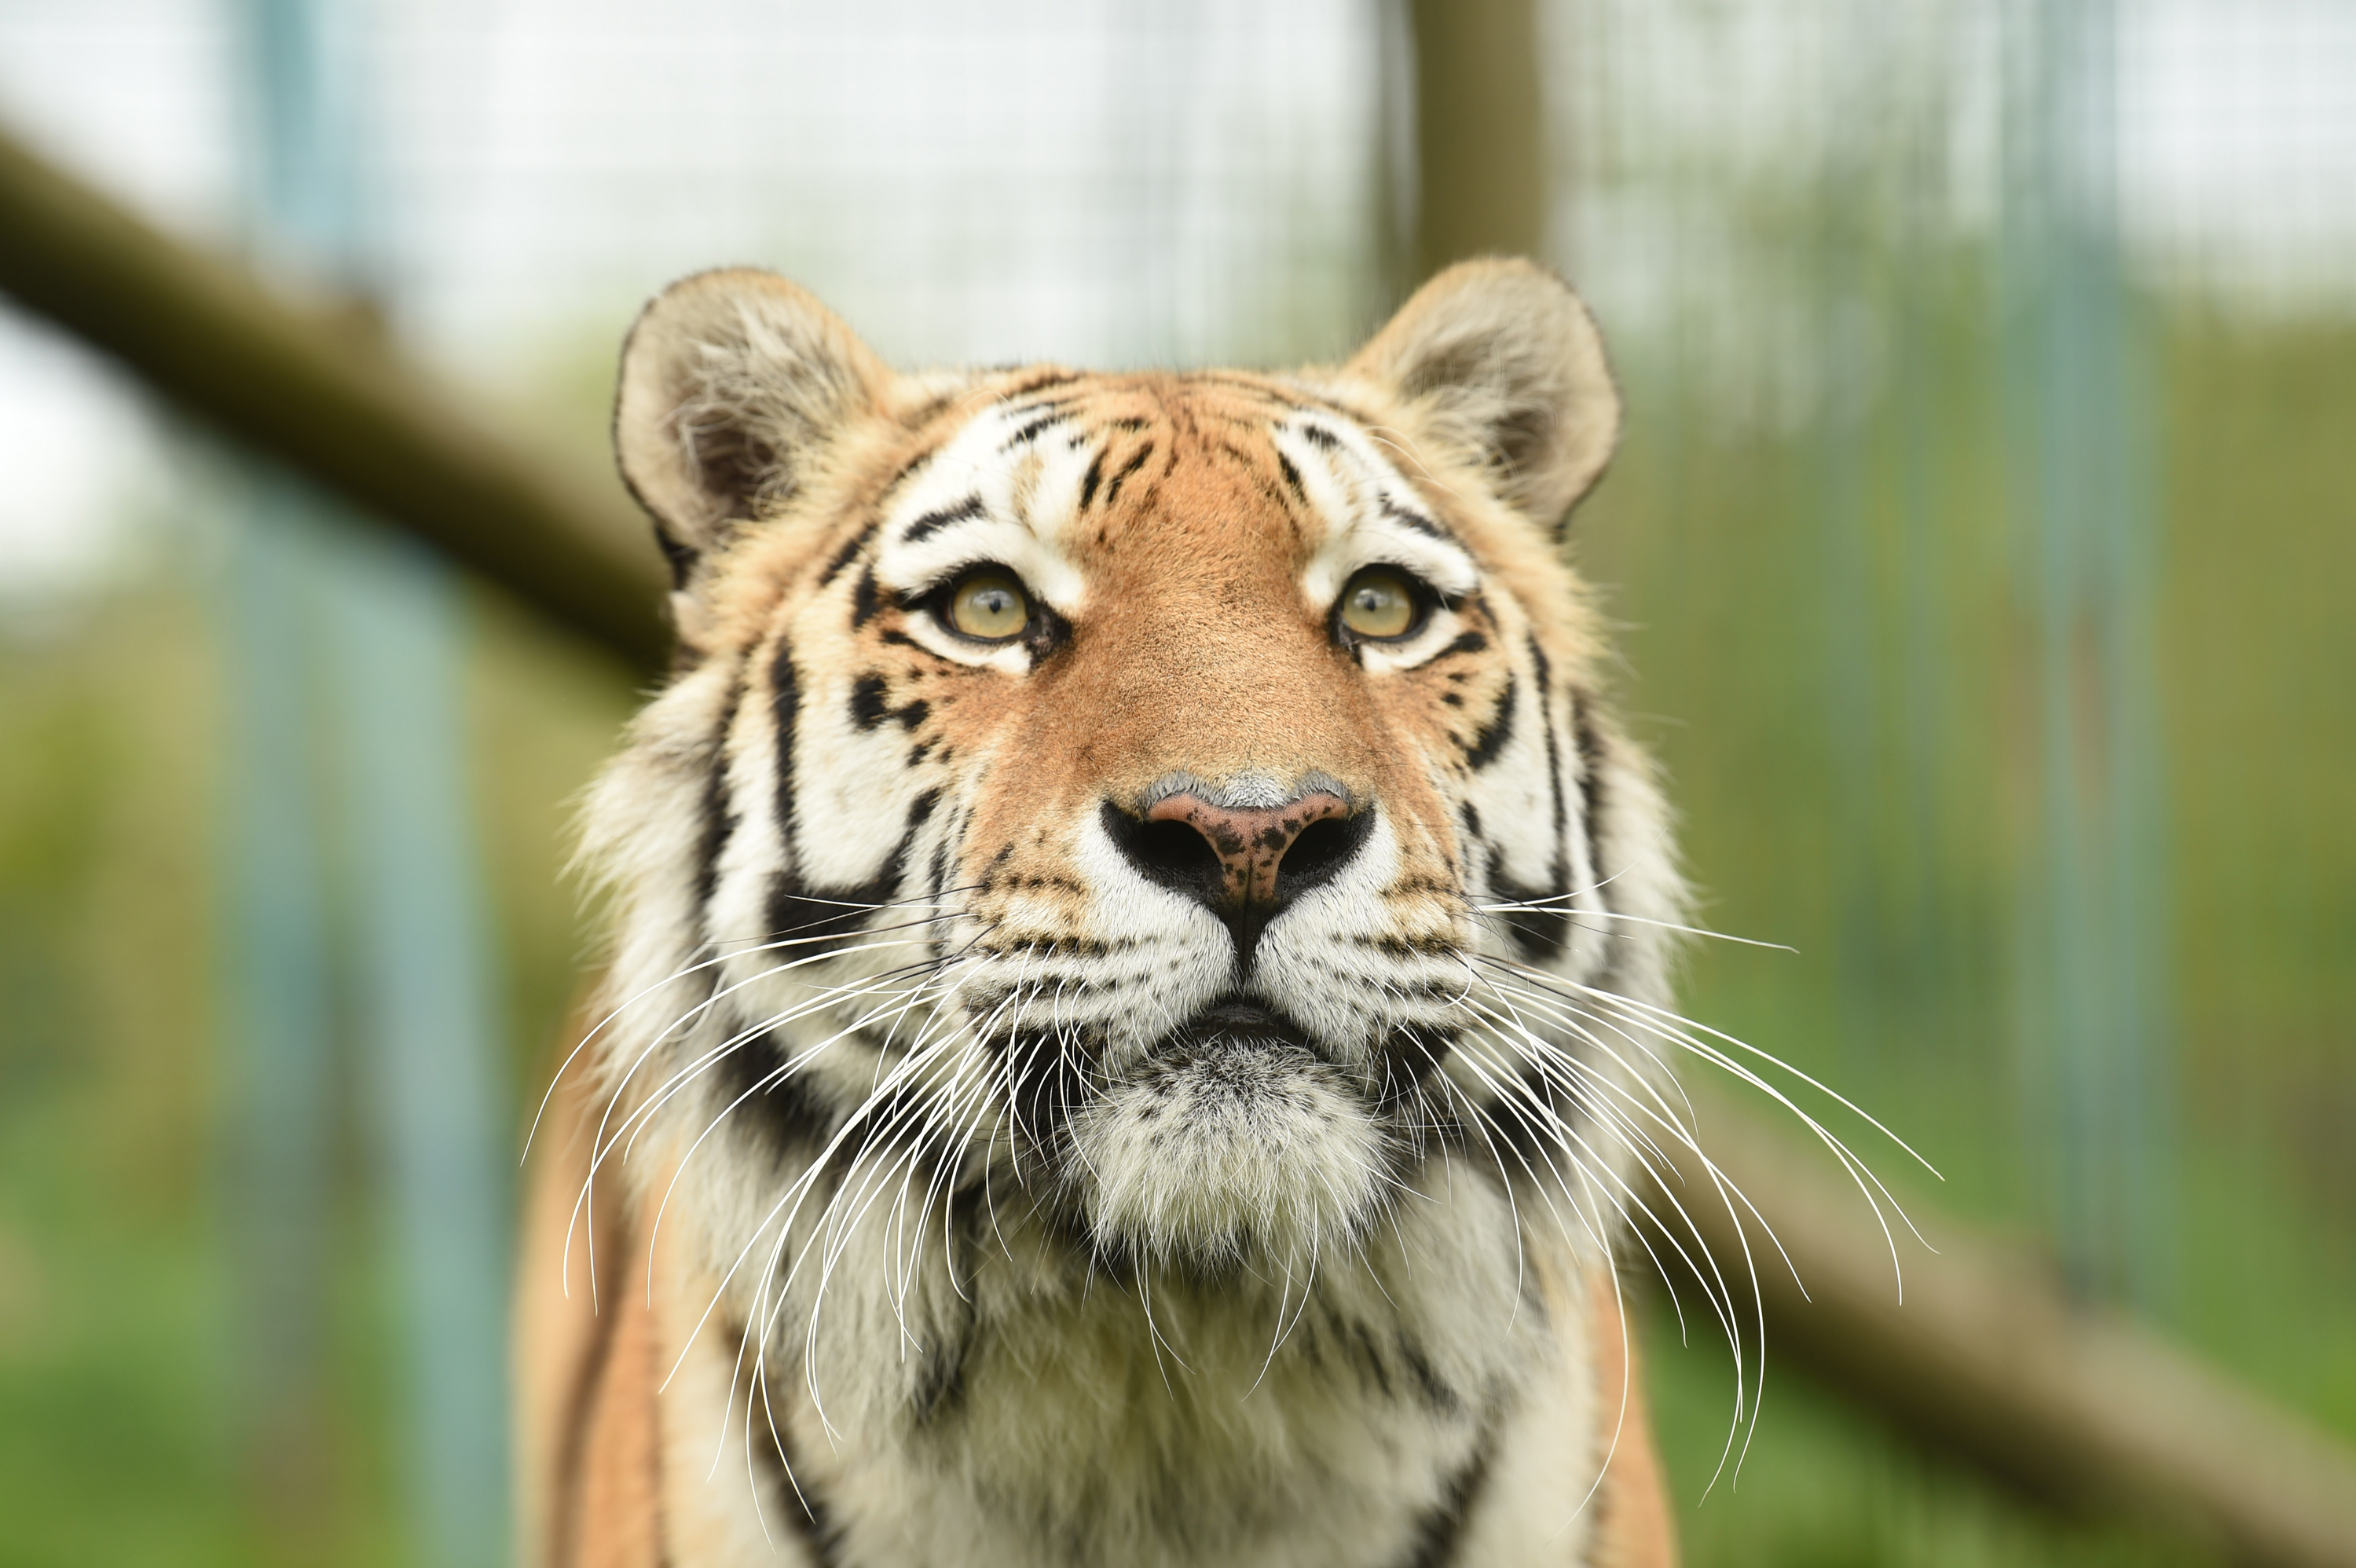 Will Newly Passed “Tiger King” Bill Protect Cubs at Zoos? Carole Baskin  Weighs In. | VegNews